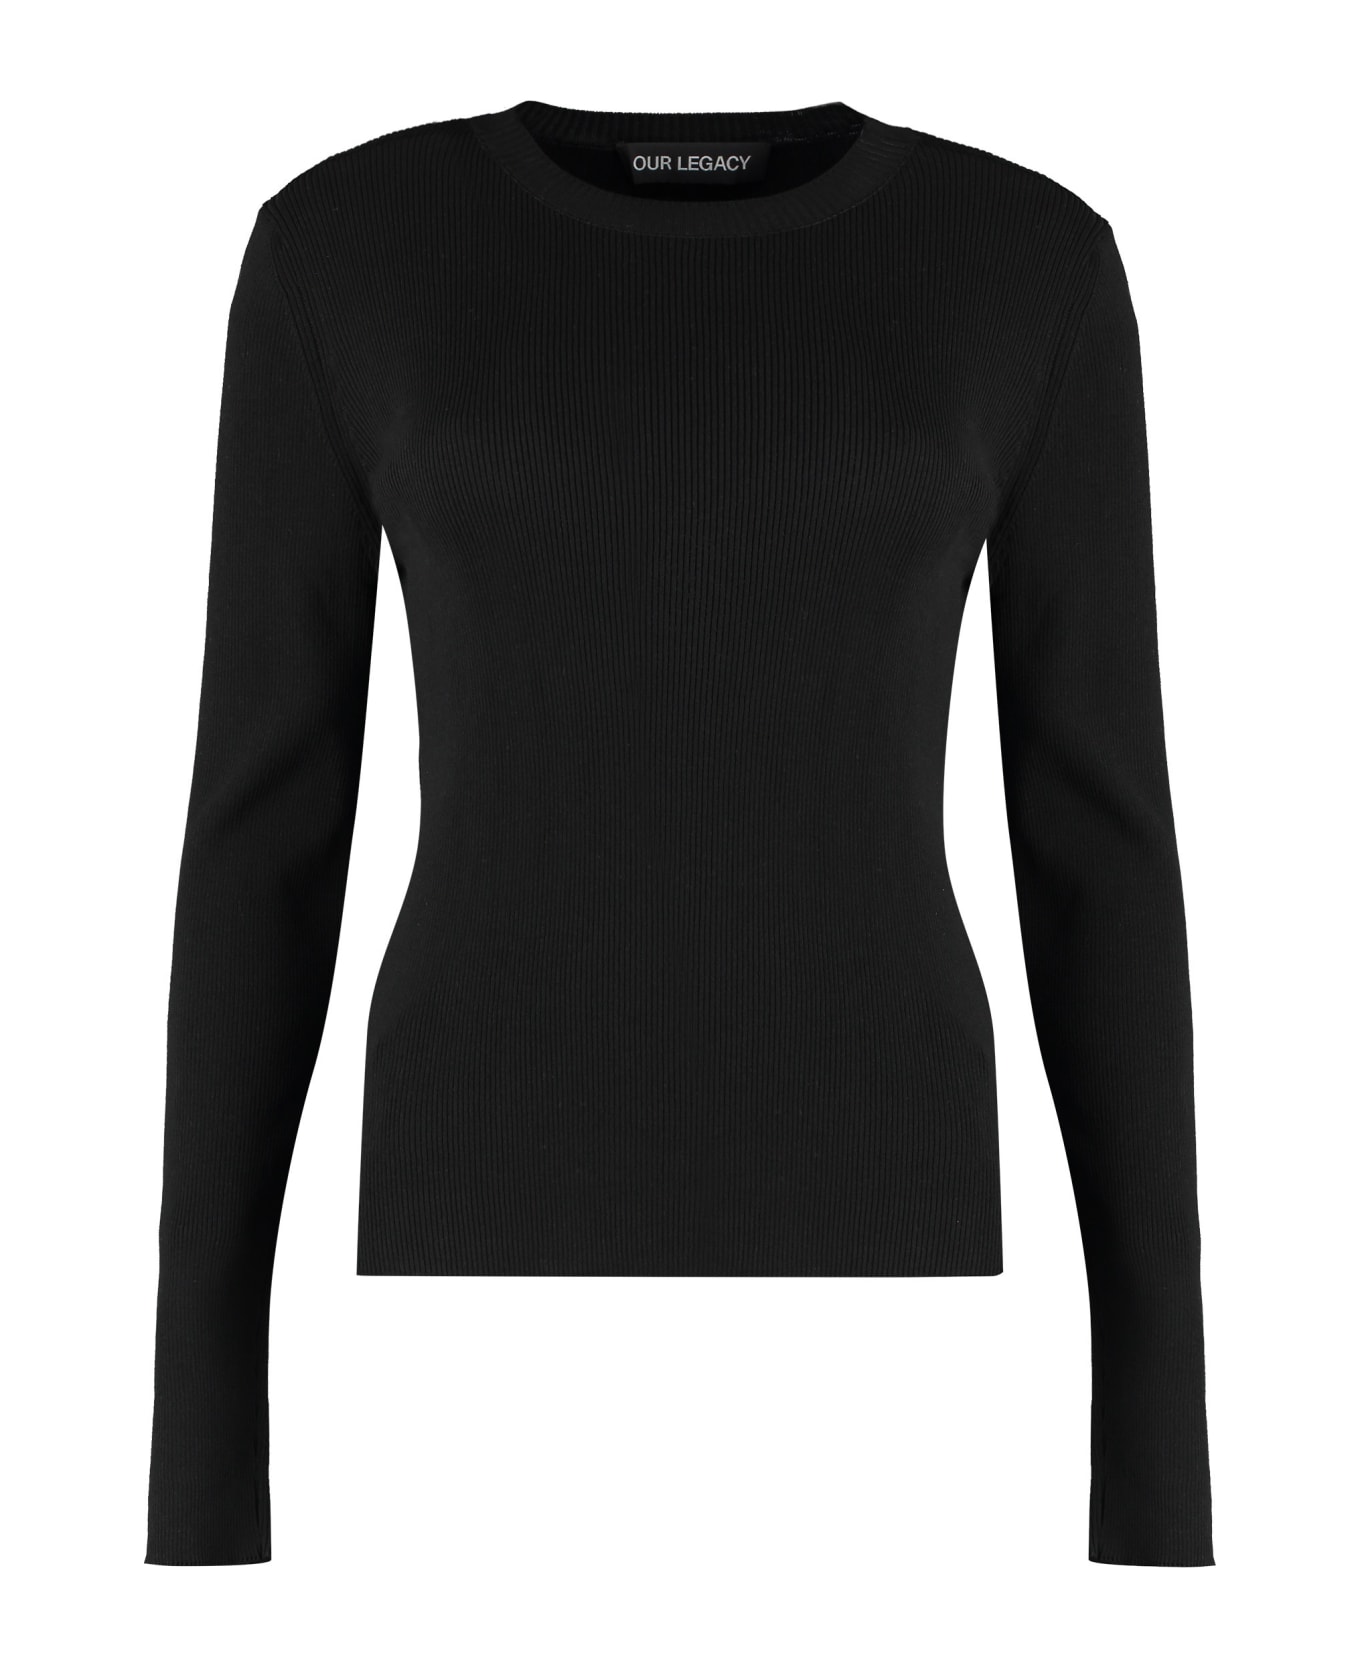 Our Legacy Compact Long Sleeve T-shirt - black